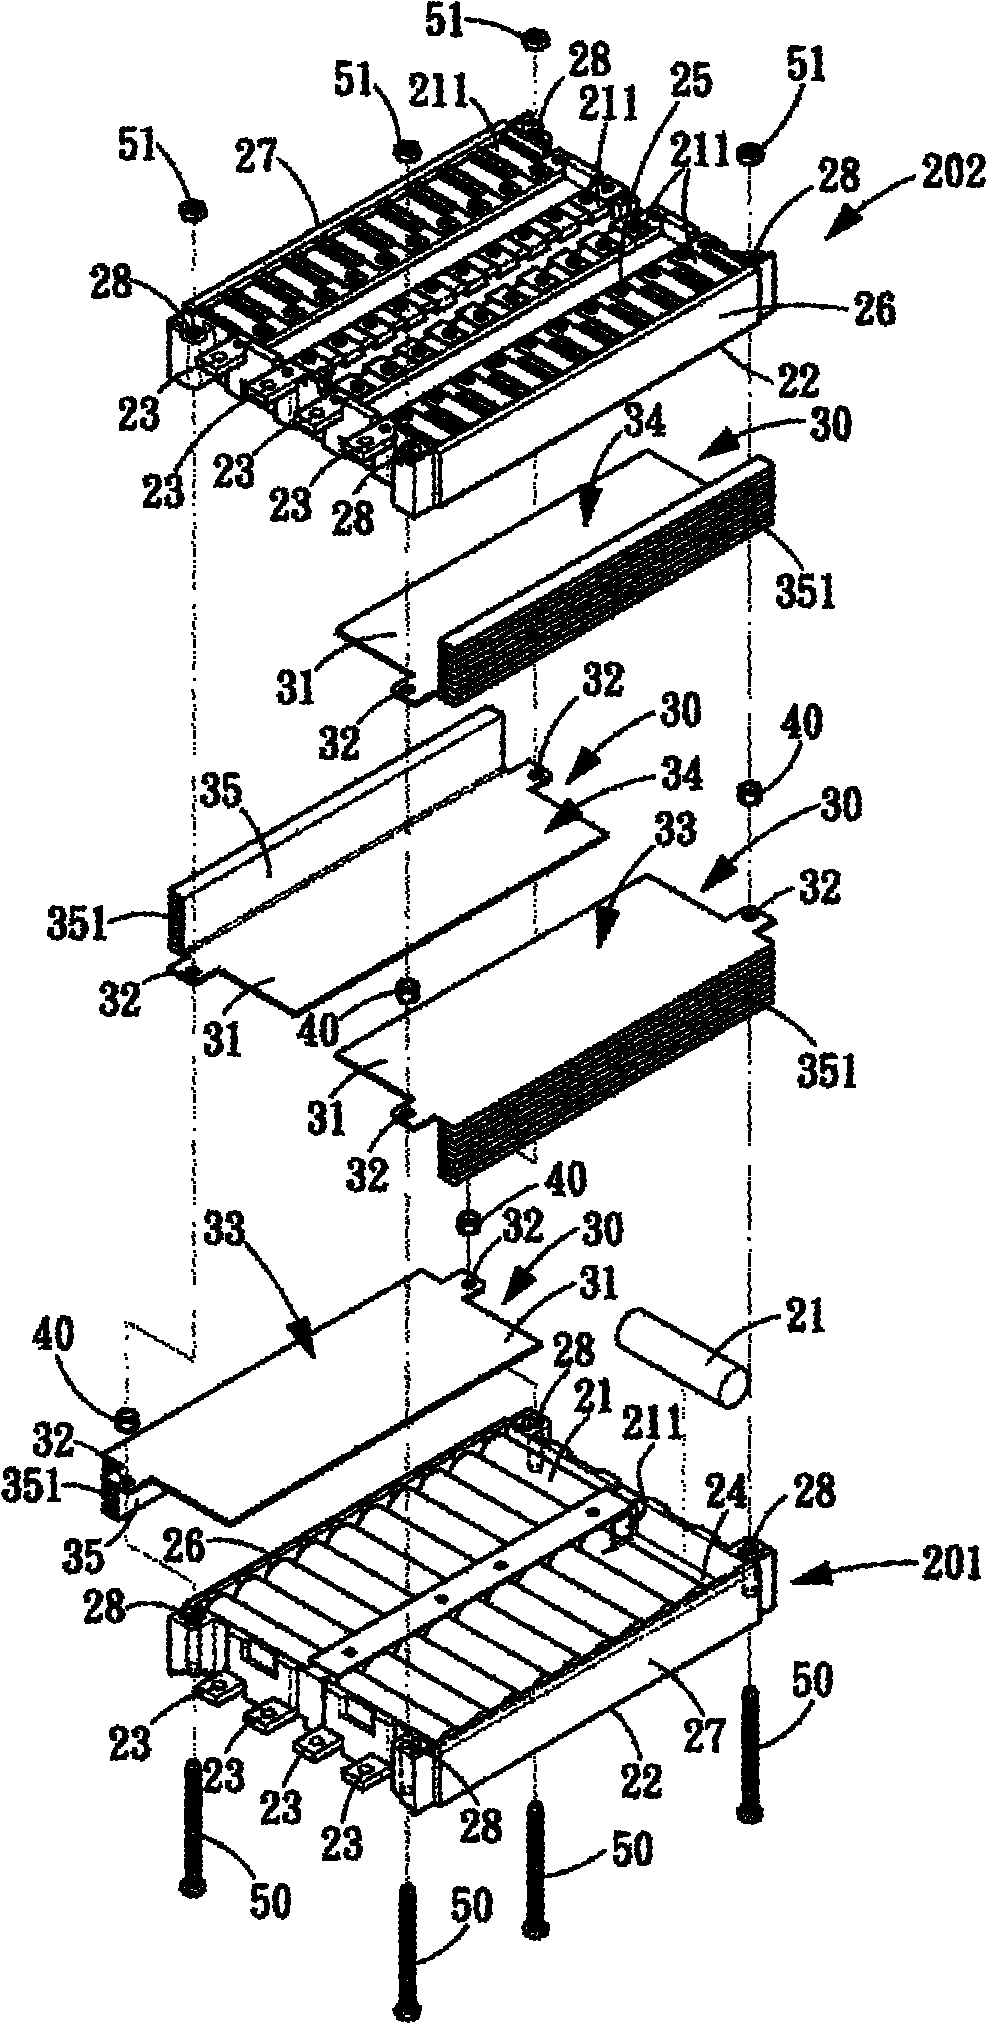 Heat radiation structure aggregate cell superimposed by multiple cell modules